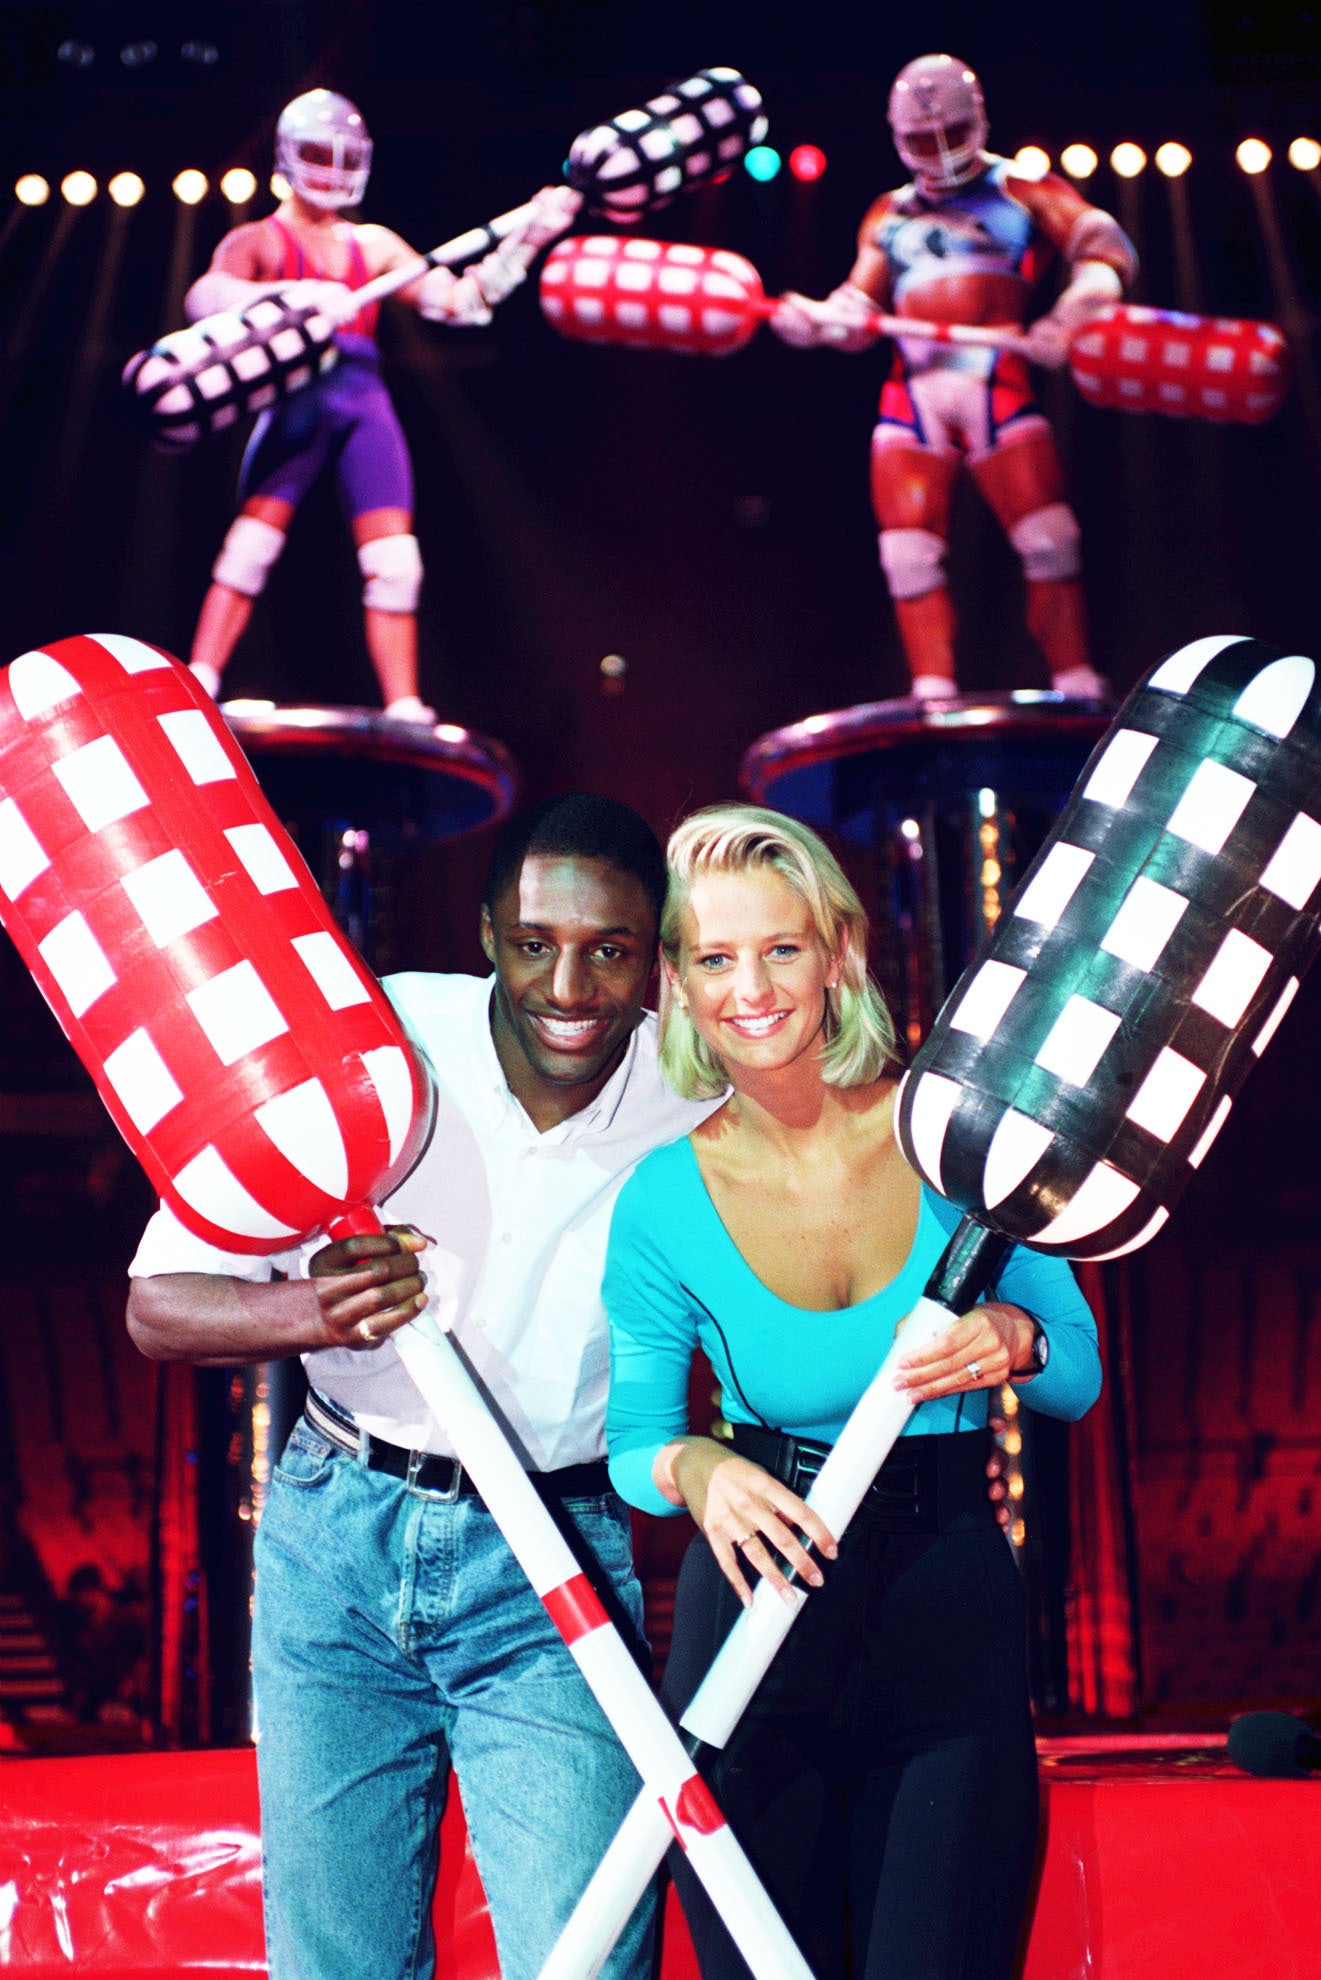 John Fashanu and Ulrika Jonsson, were the hosts of ‘Gladiators’ during its run on ITV (PA)